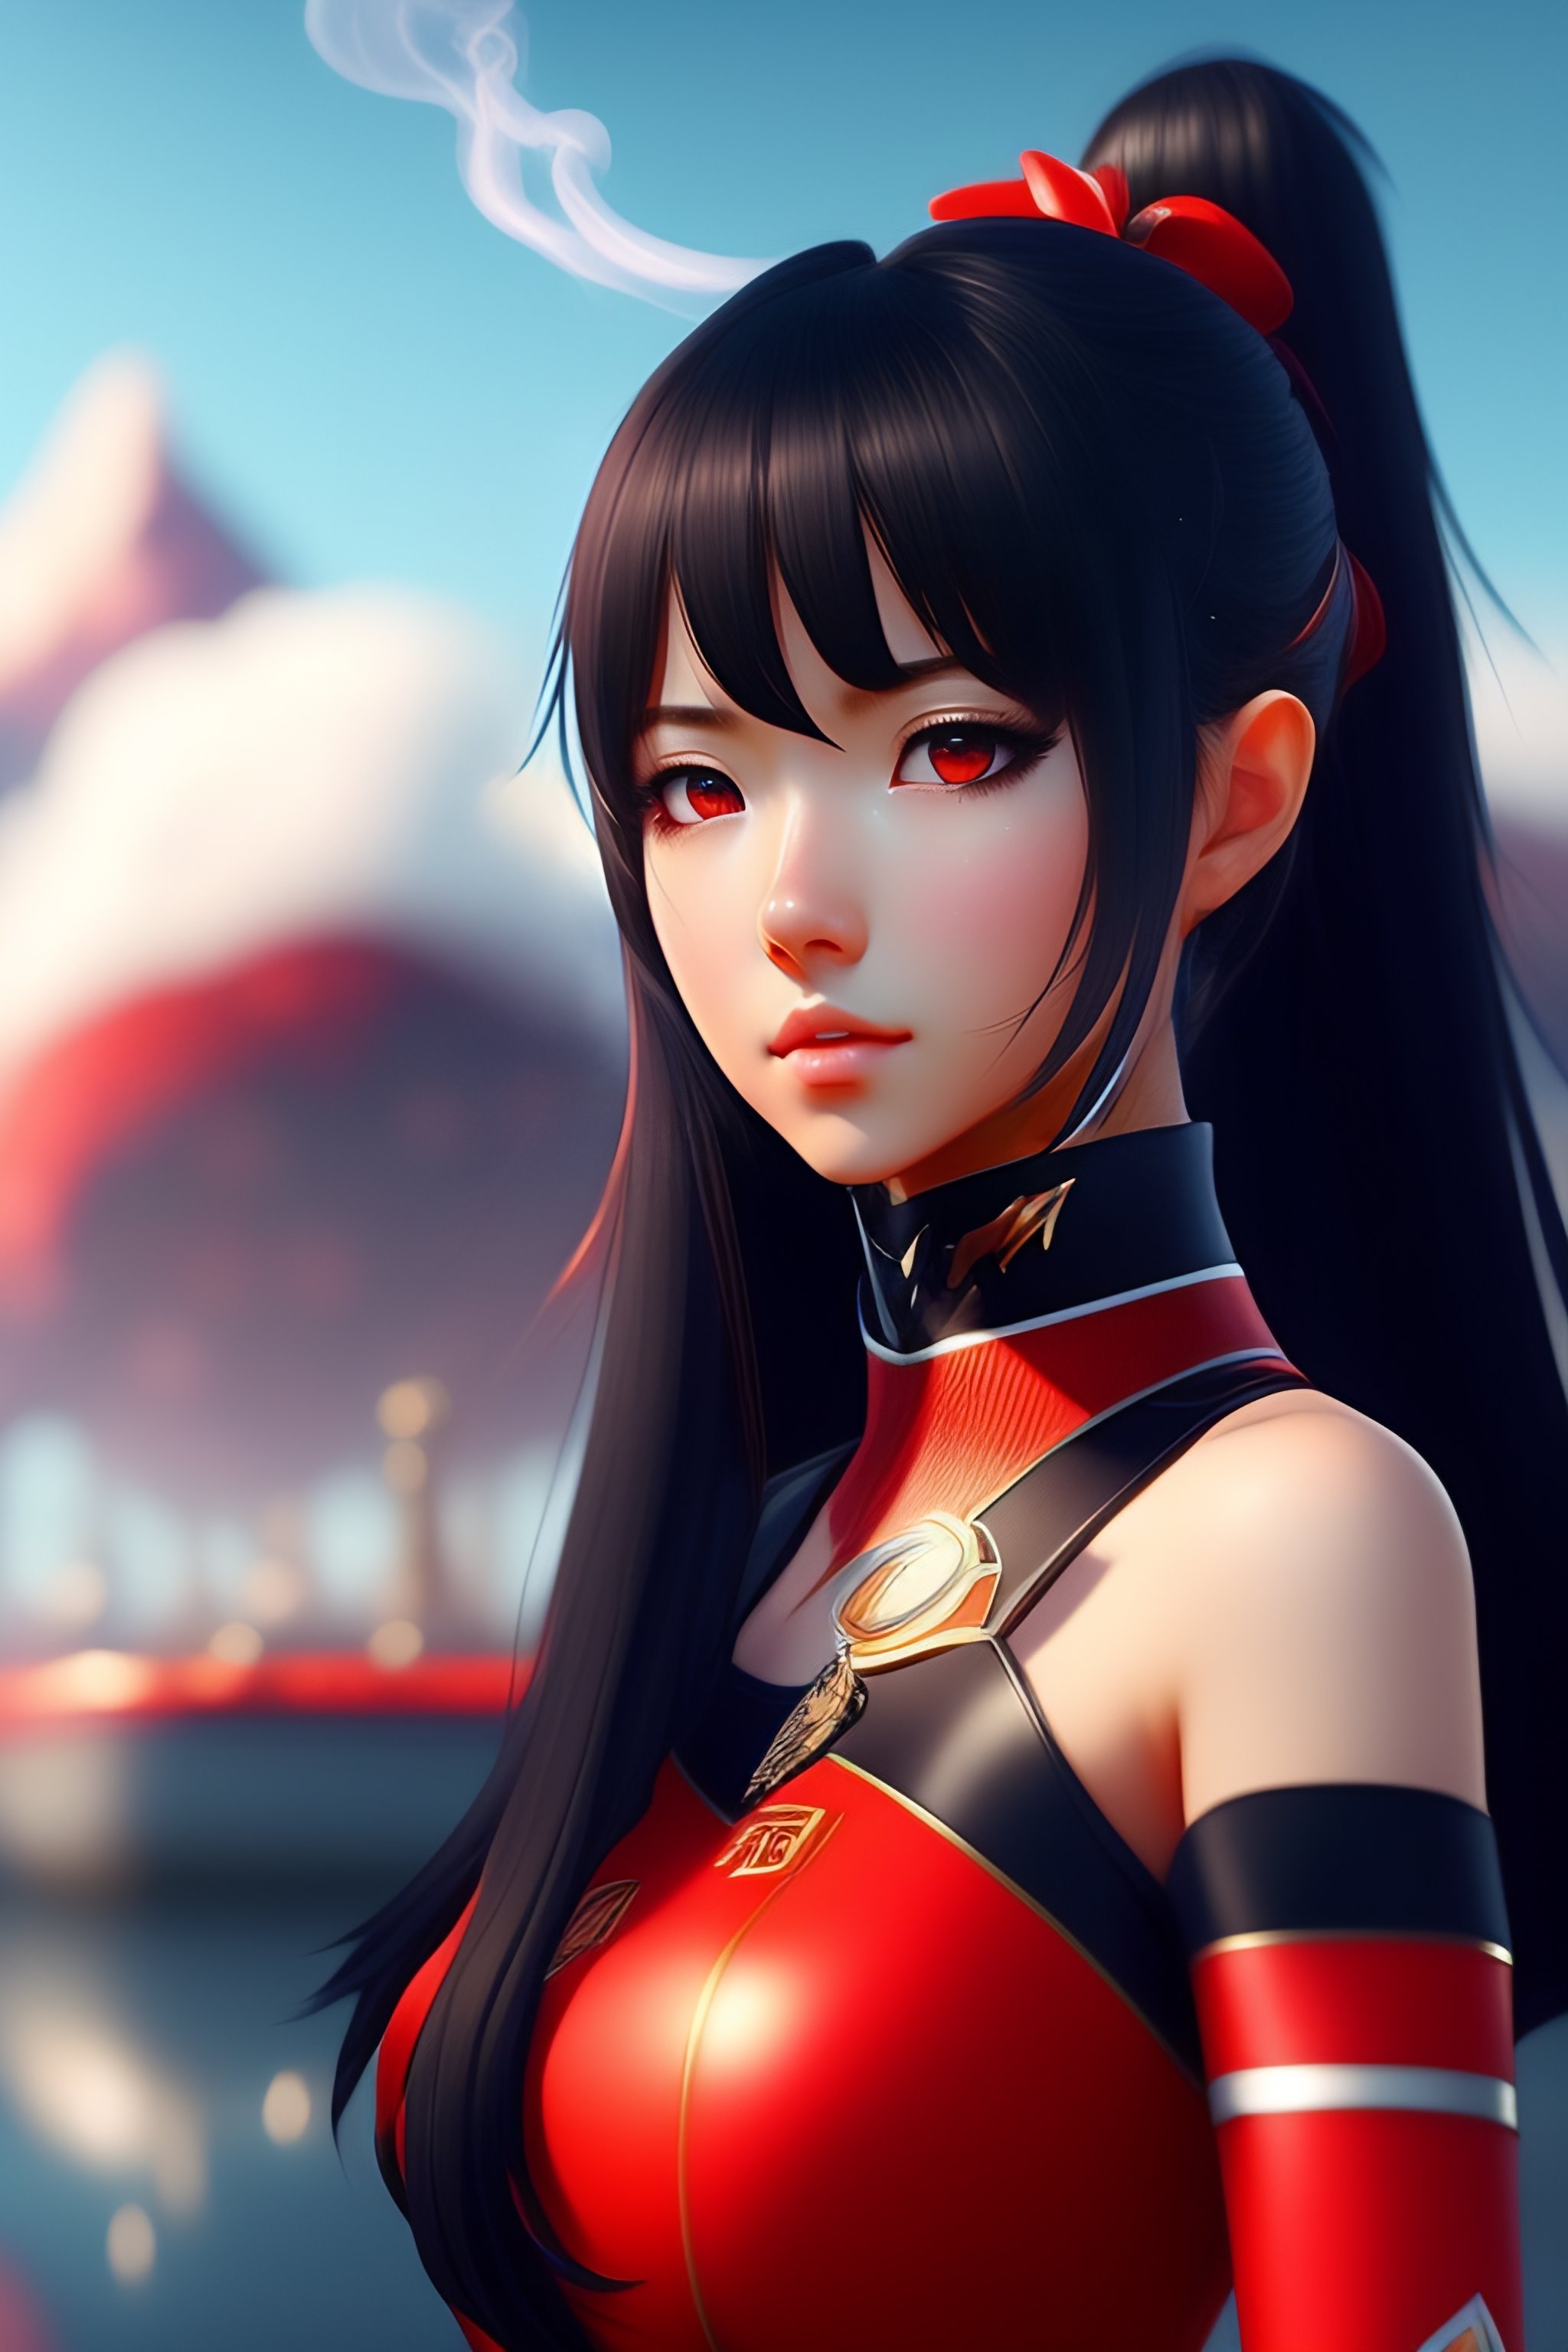 Beautiful anime girl with black hair and red eyes